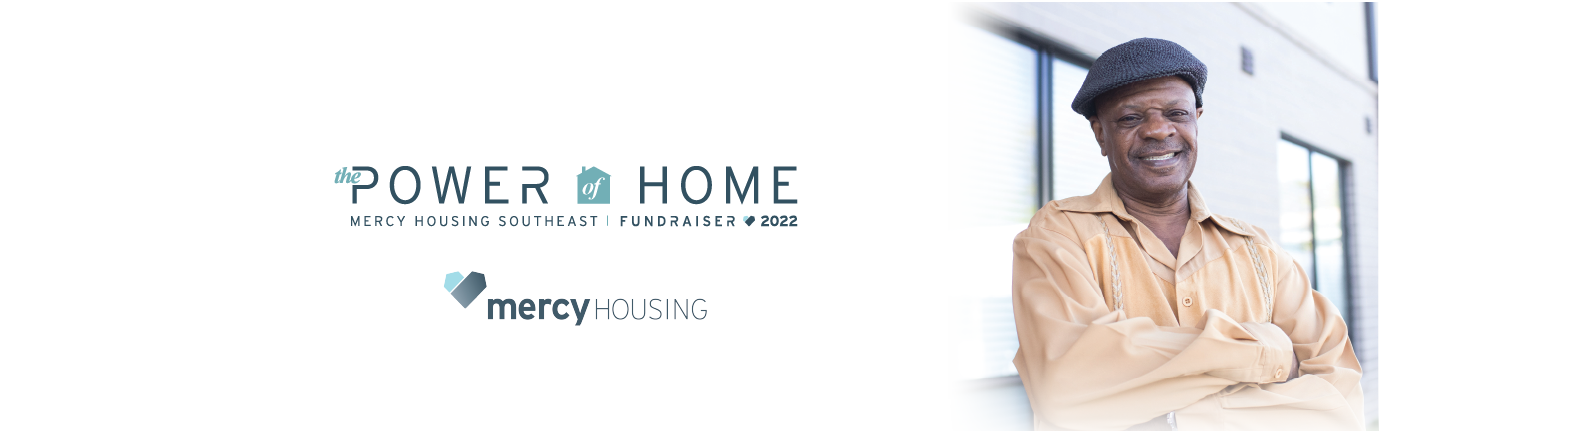 Power of Home 2022 | Mercy Housing Southeast